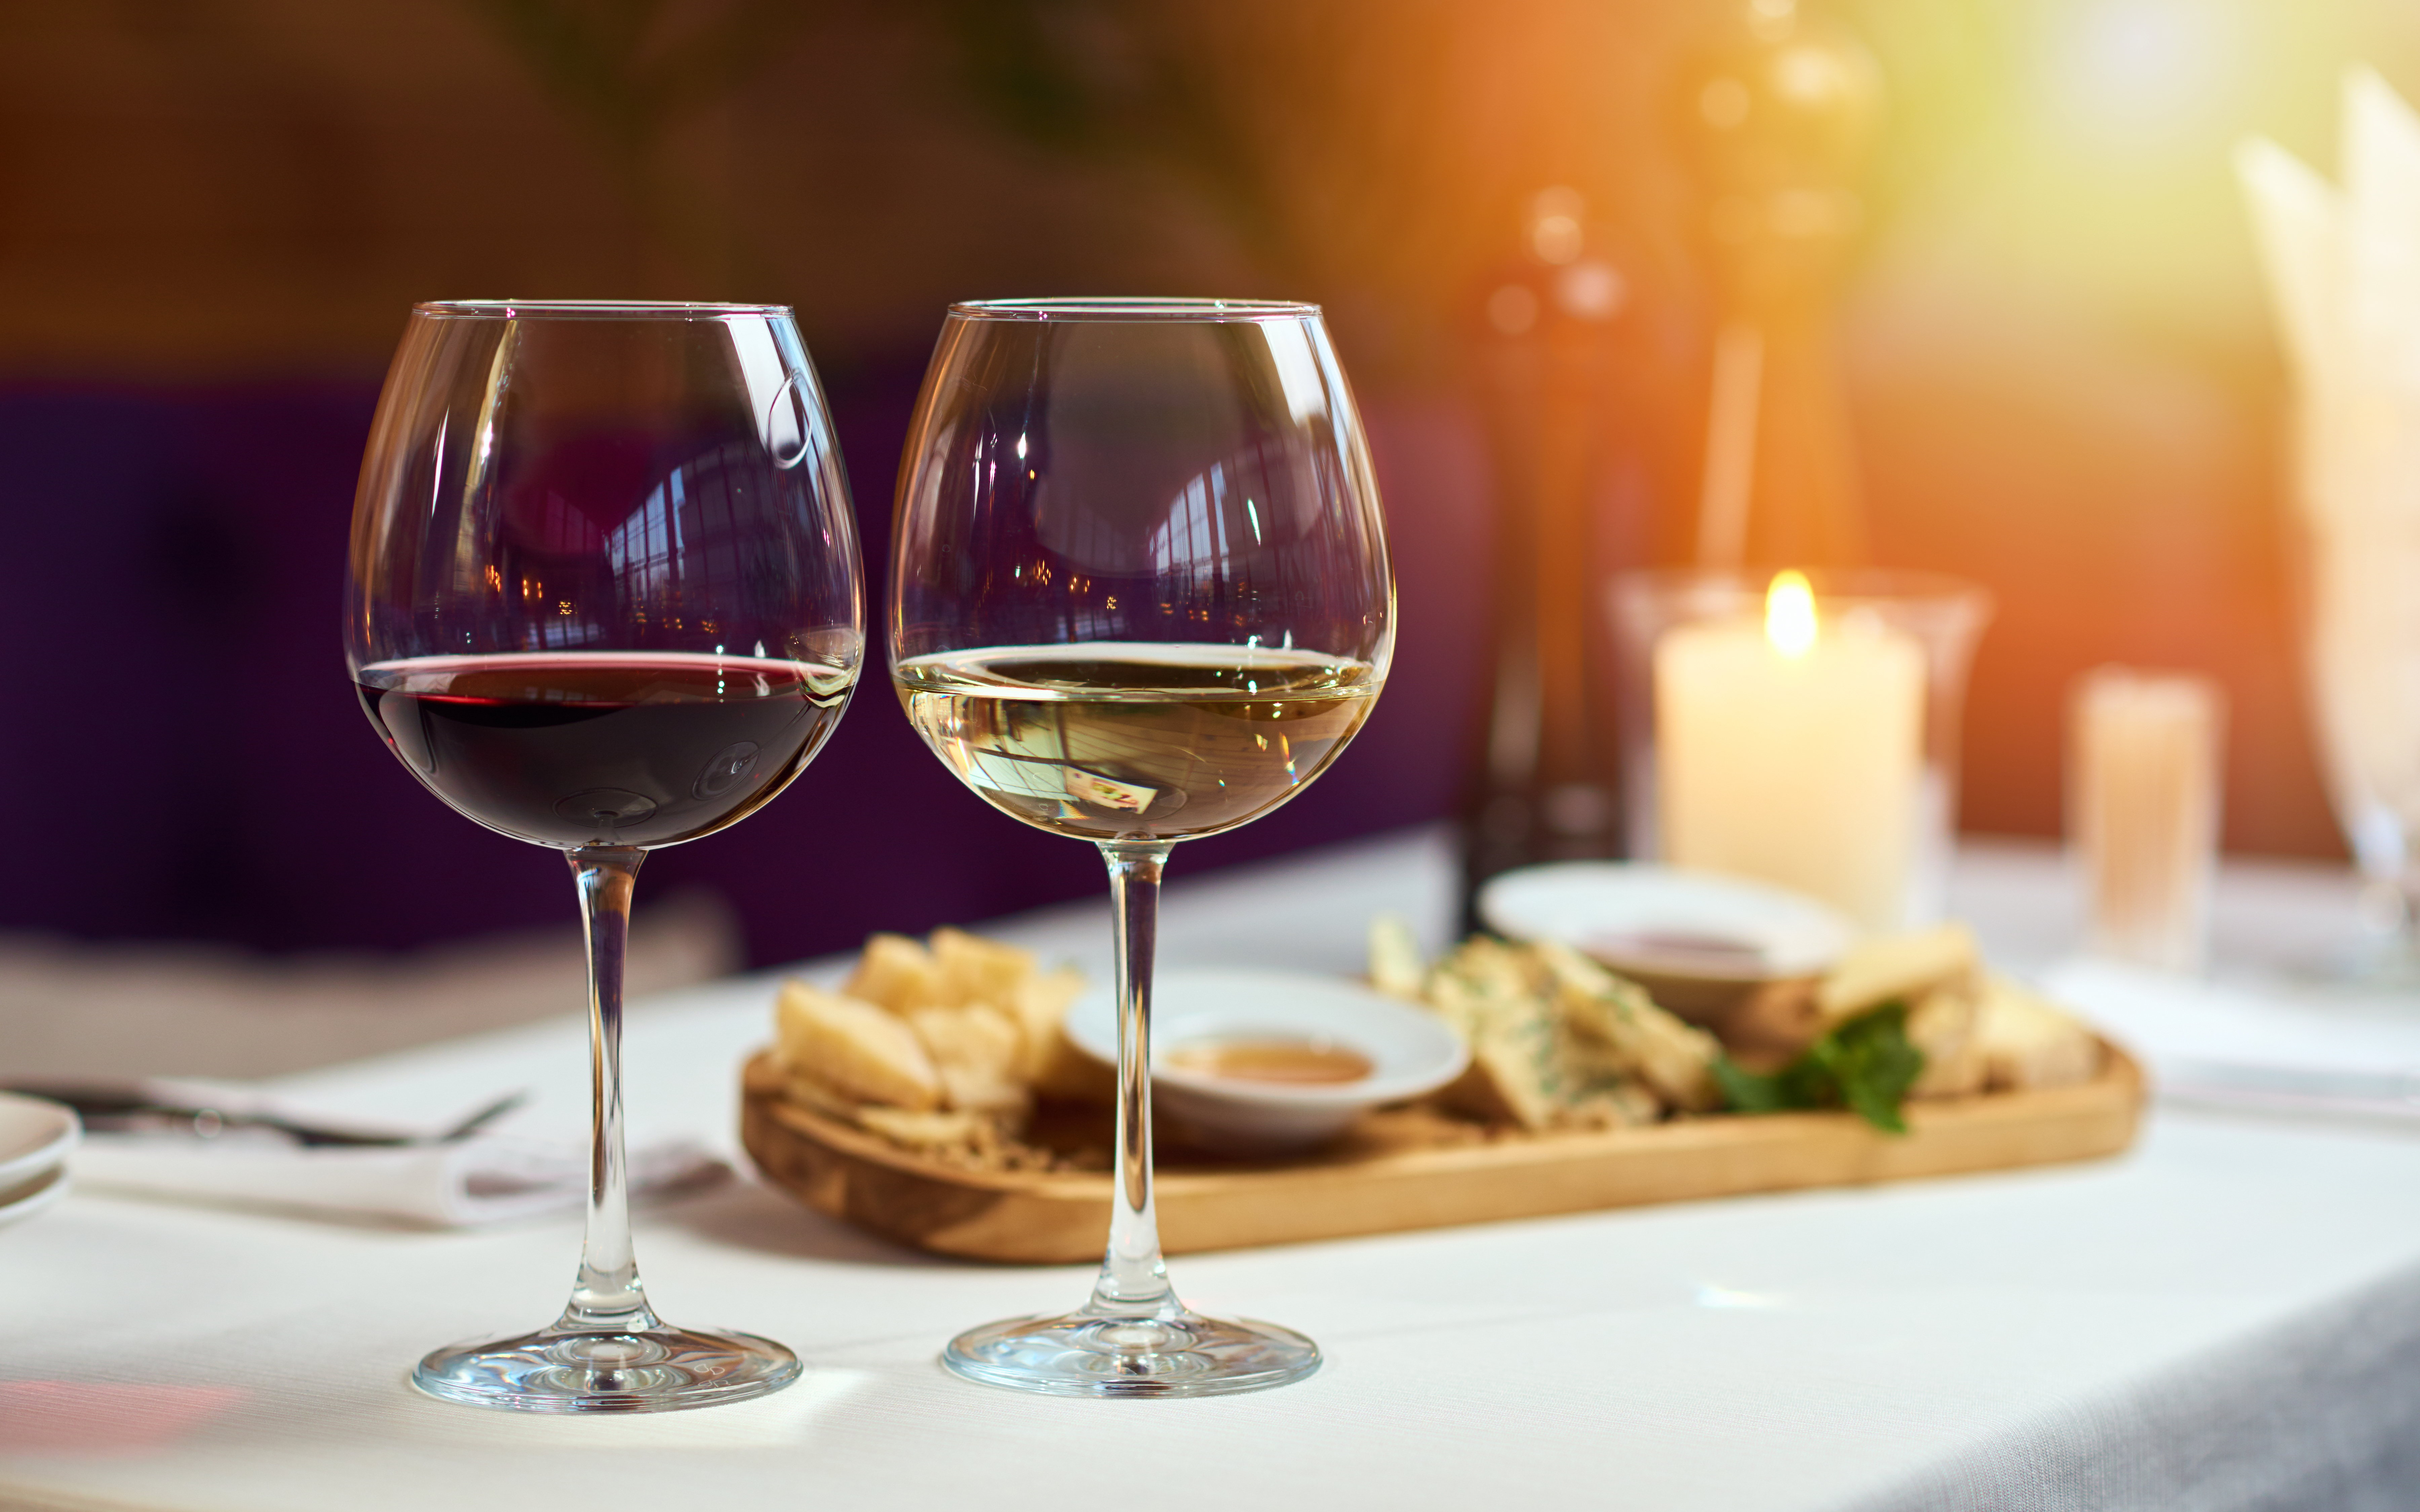 Two glasses of wine white and red standing on a table with a platter of cheeses and candle behind them in the sun light